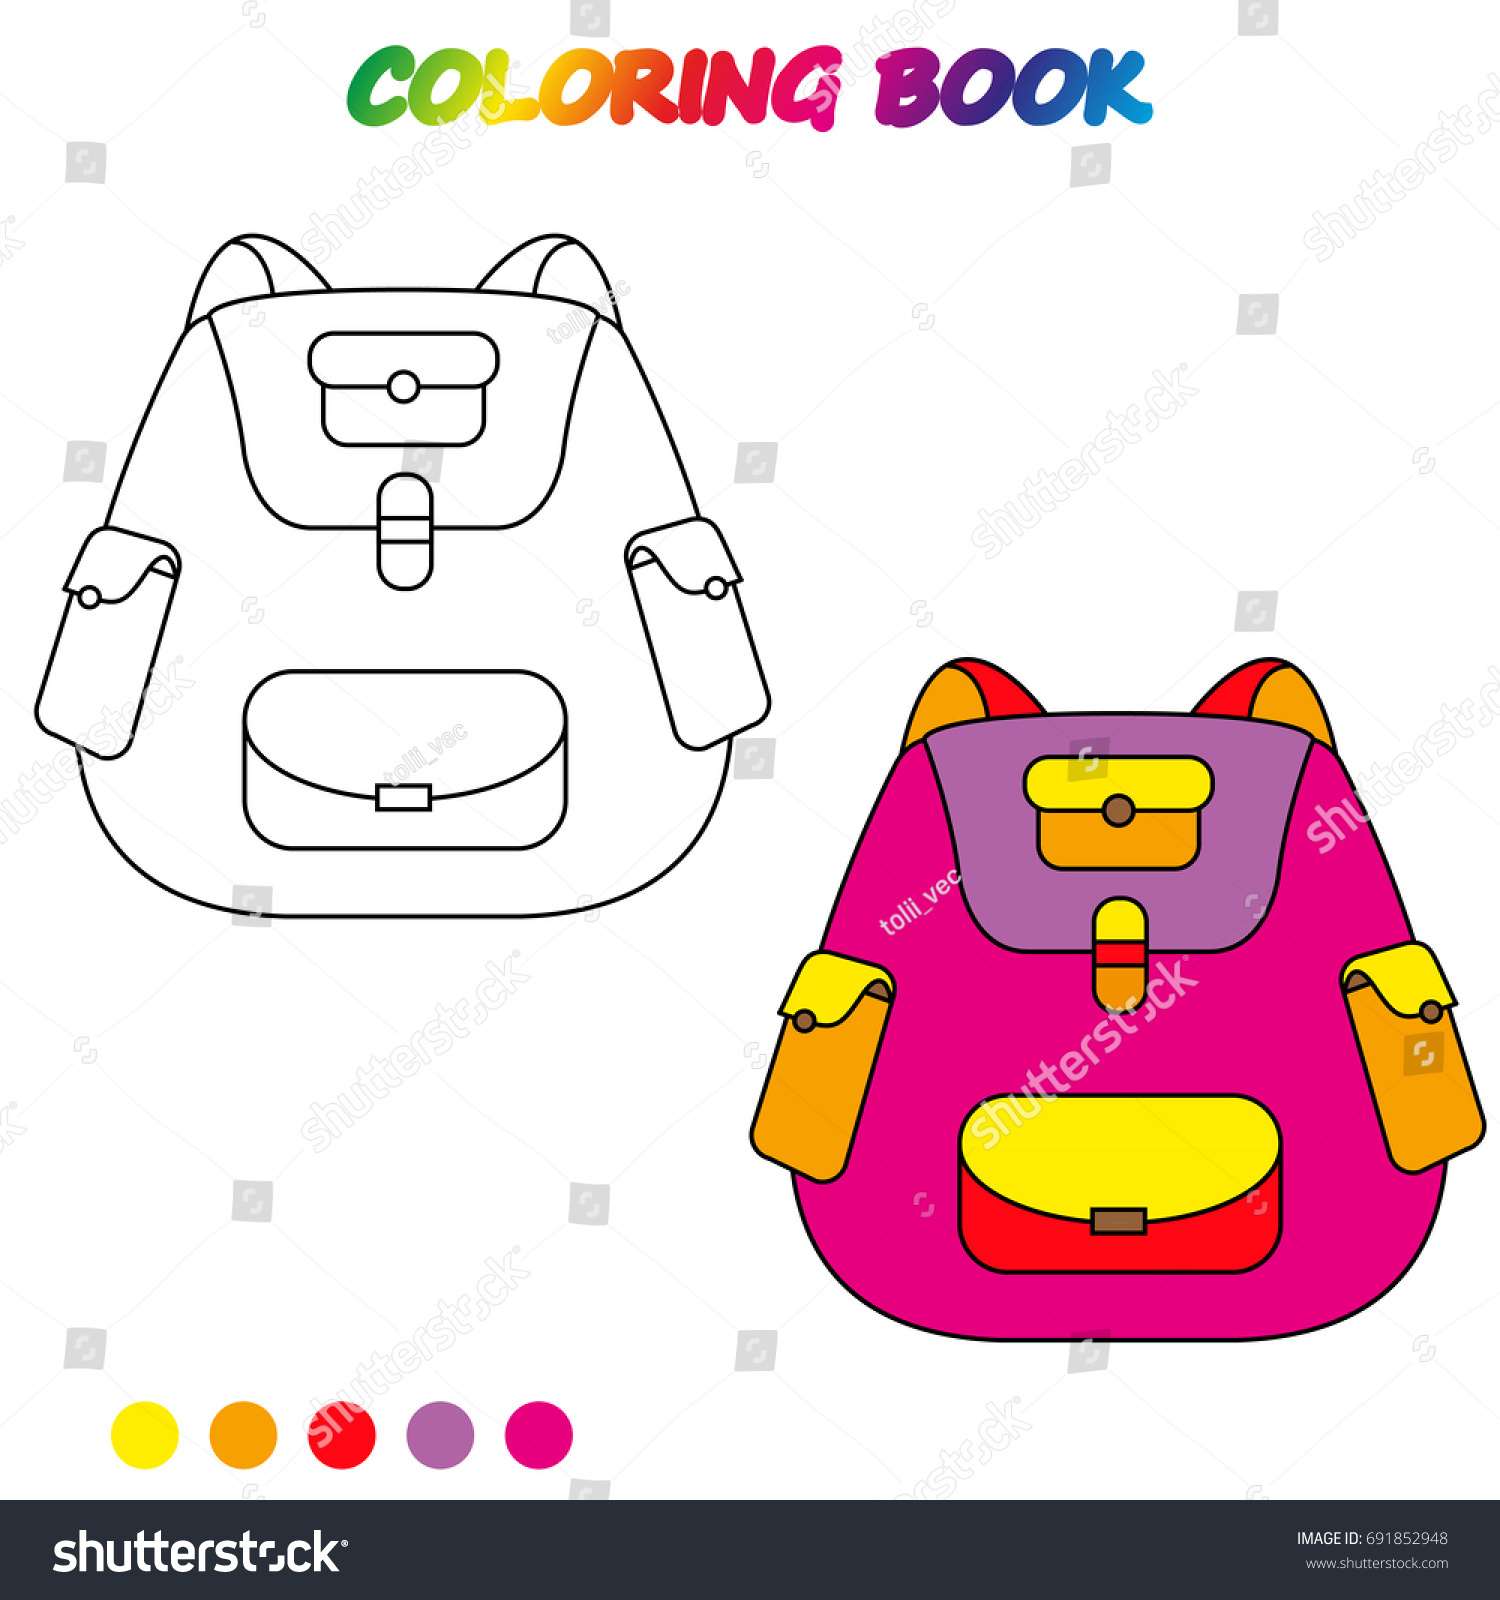 Backpack Coloring Page Worksheet Game Kids Stock Vector (Royalty